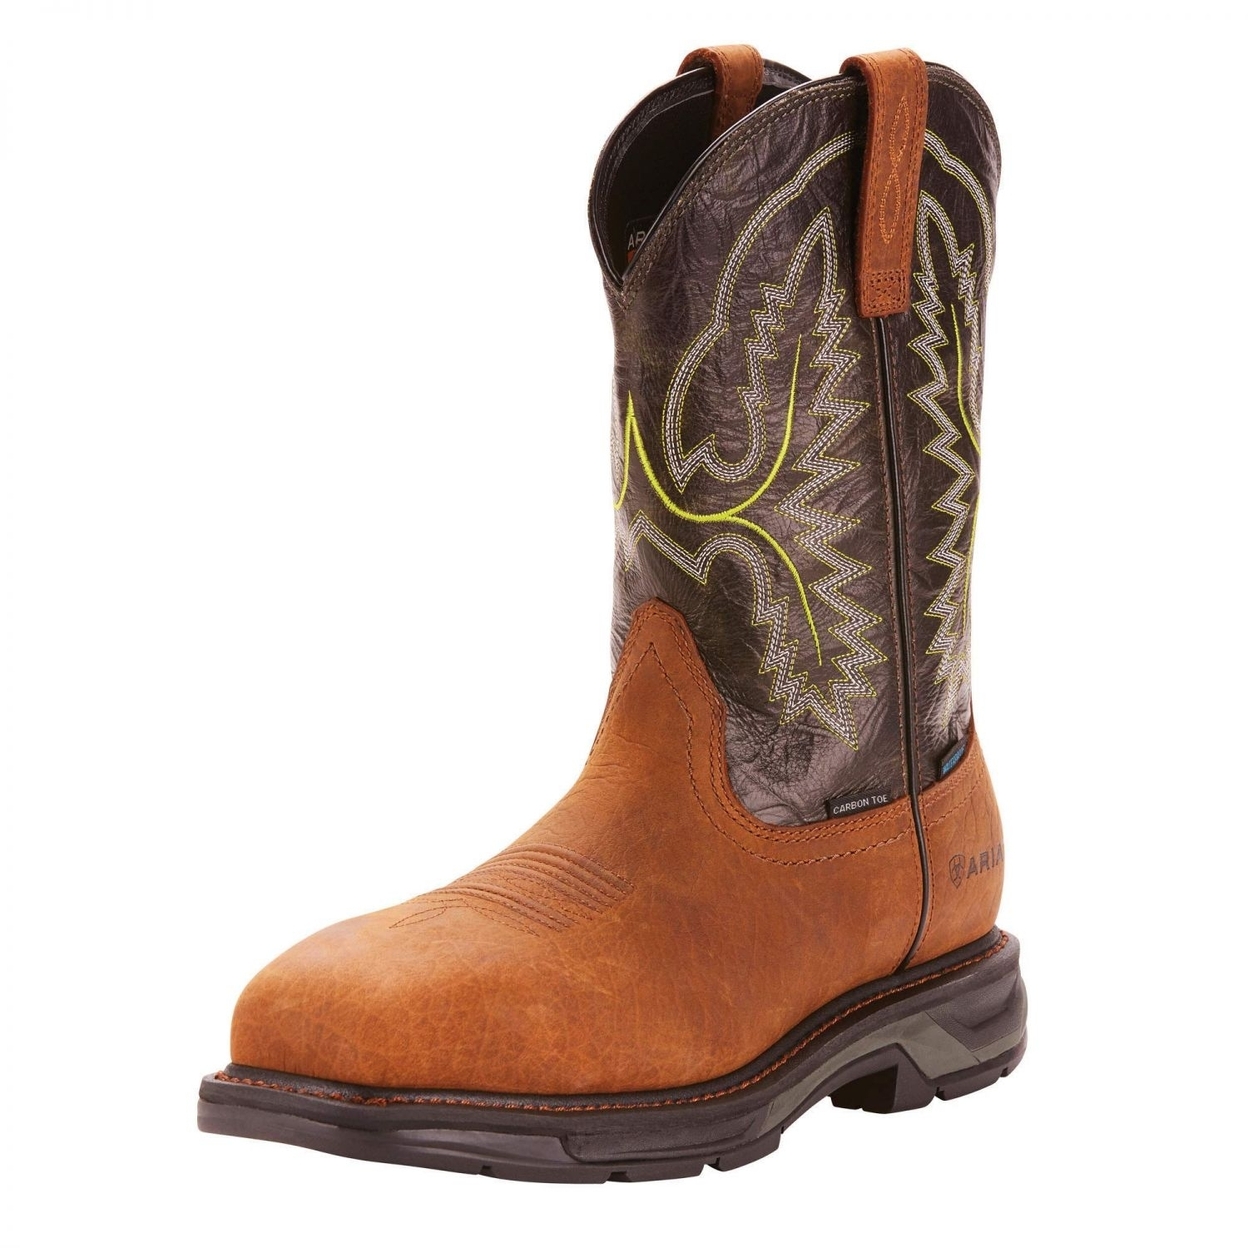 Ariat Work Men's Workhog XT H2O Carbon Toe Western Boot ONE SIZE BRK/ FOREST - BRK/ FOREST, 10.5-D